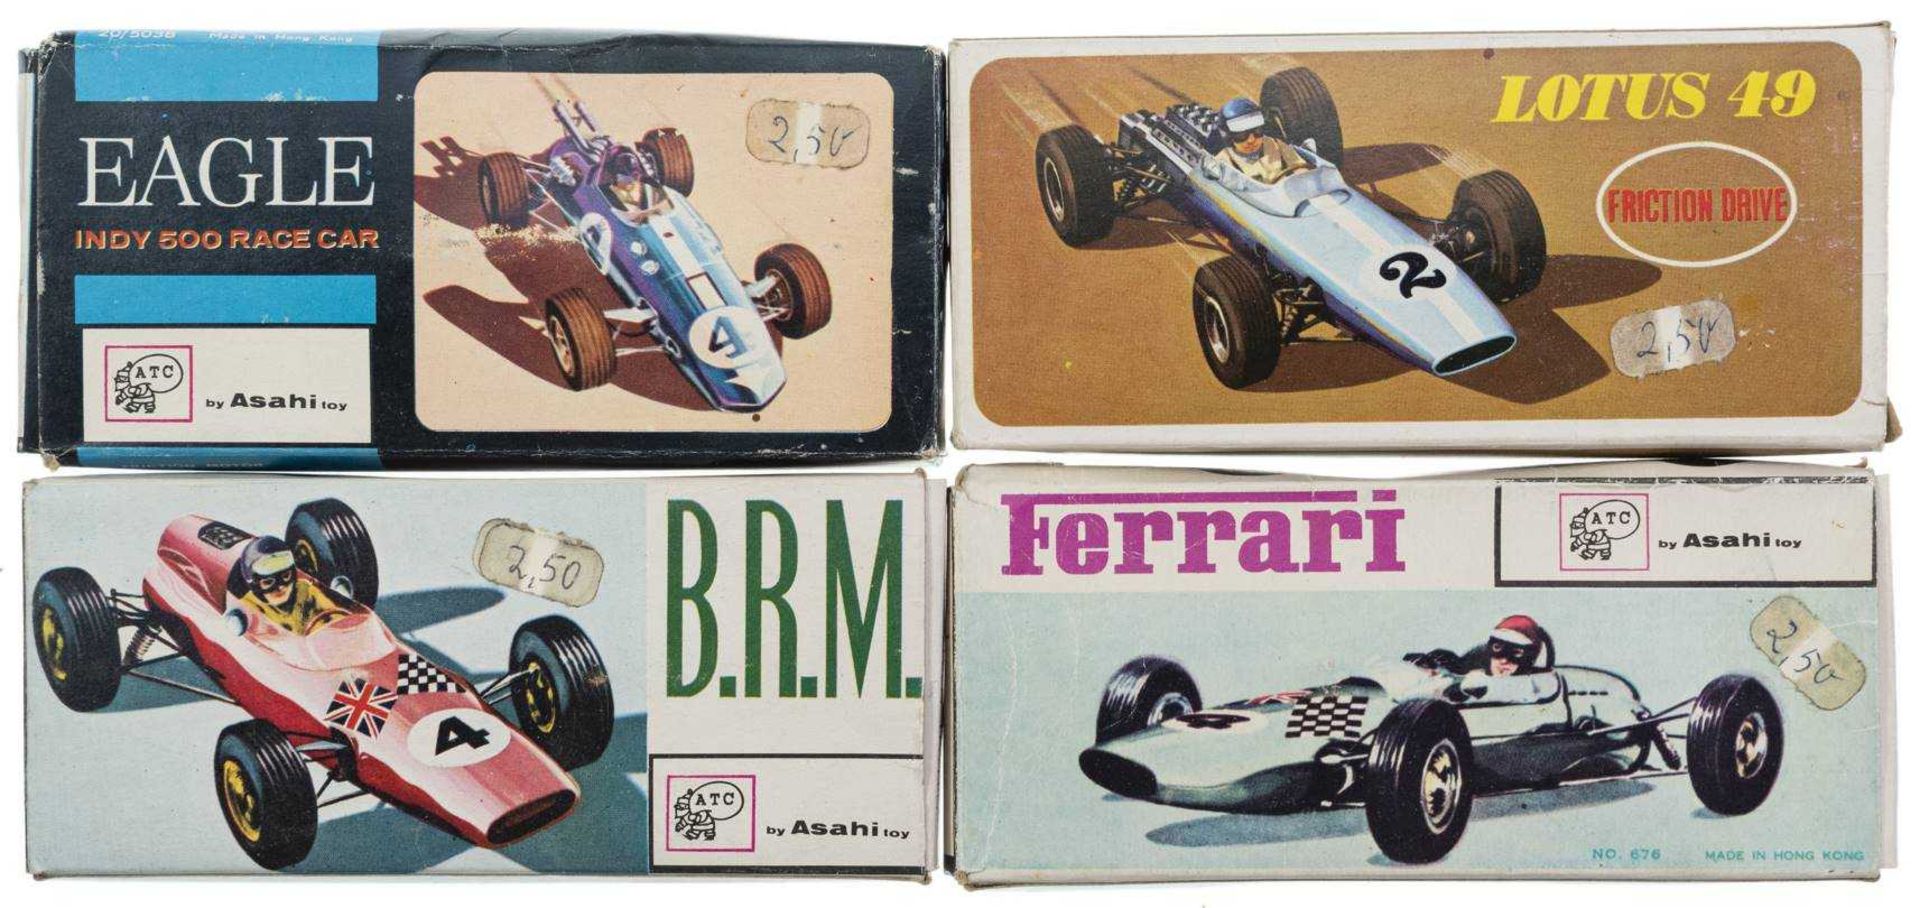 About 1972, 4 small racing / INDYCAR models with B. R. M., eagle, Ferrari and Lotus 49, always appro